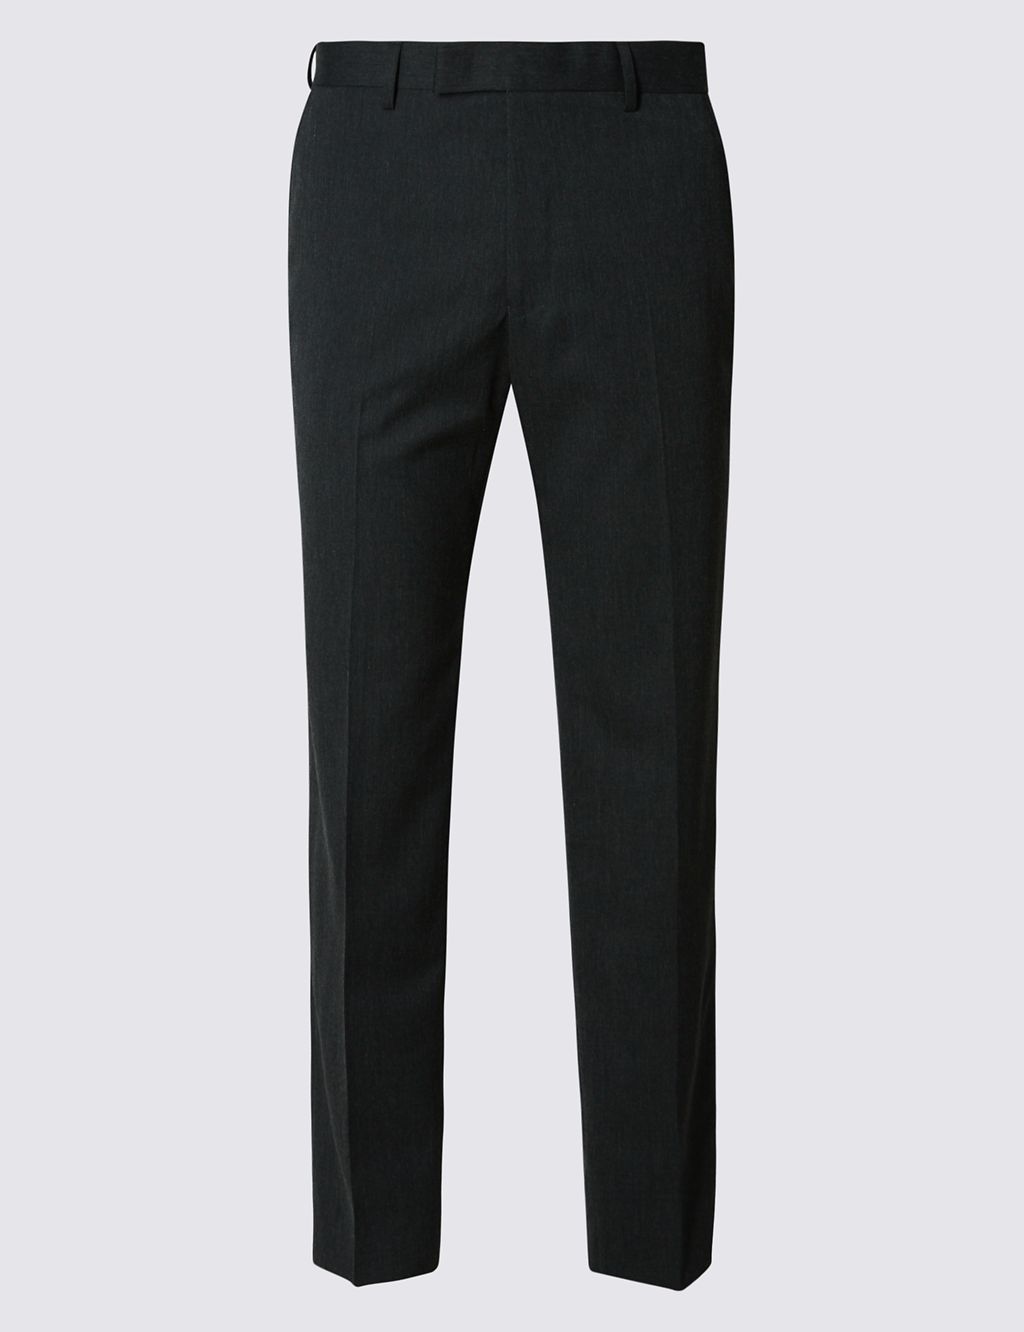 Charcoal Modern Slim Fit Trousers 1 of 5